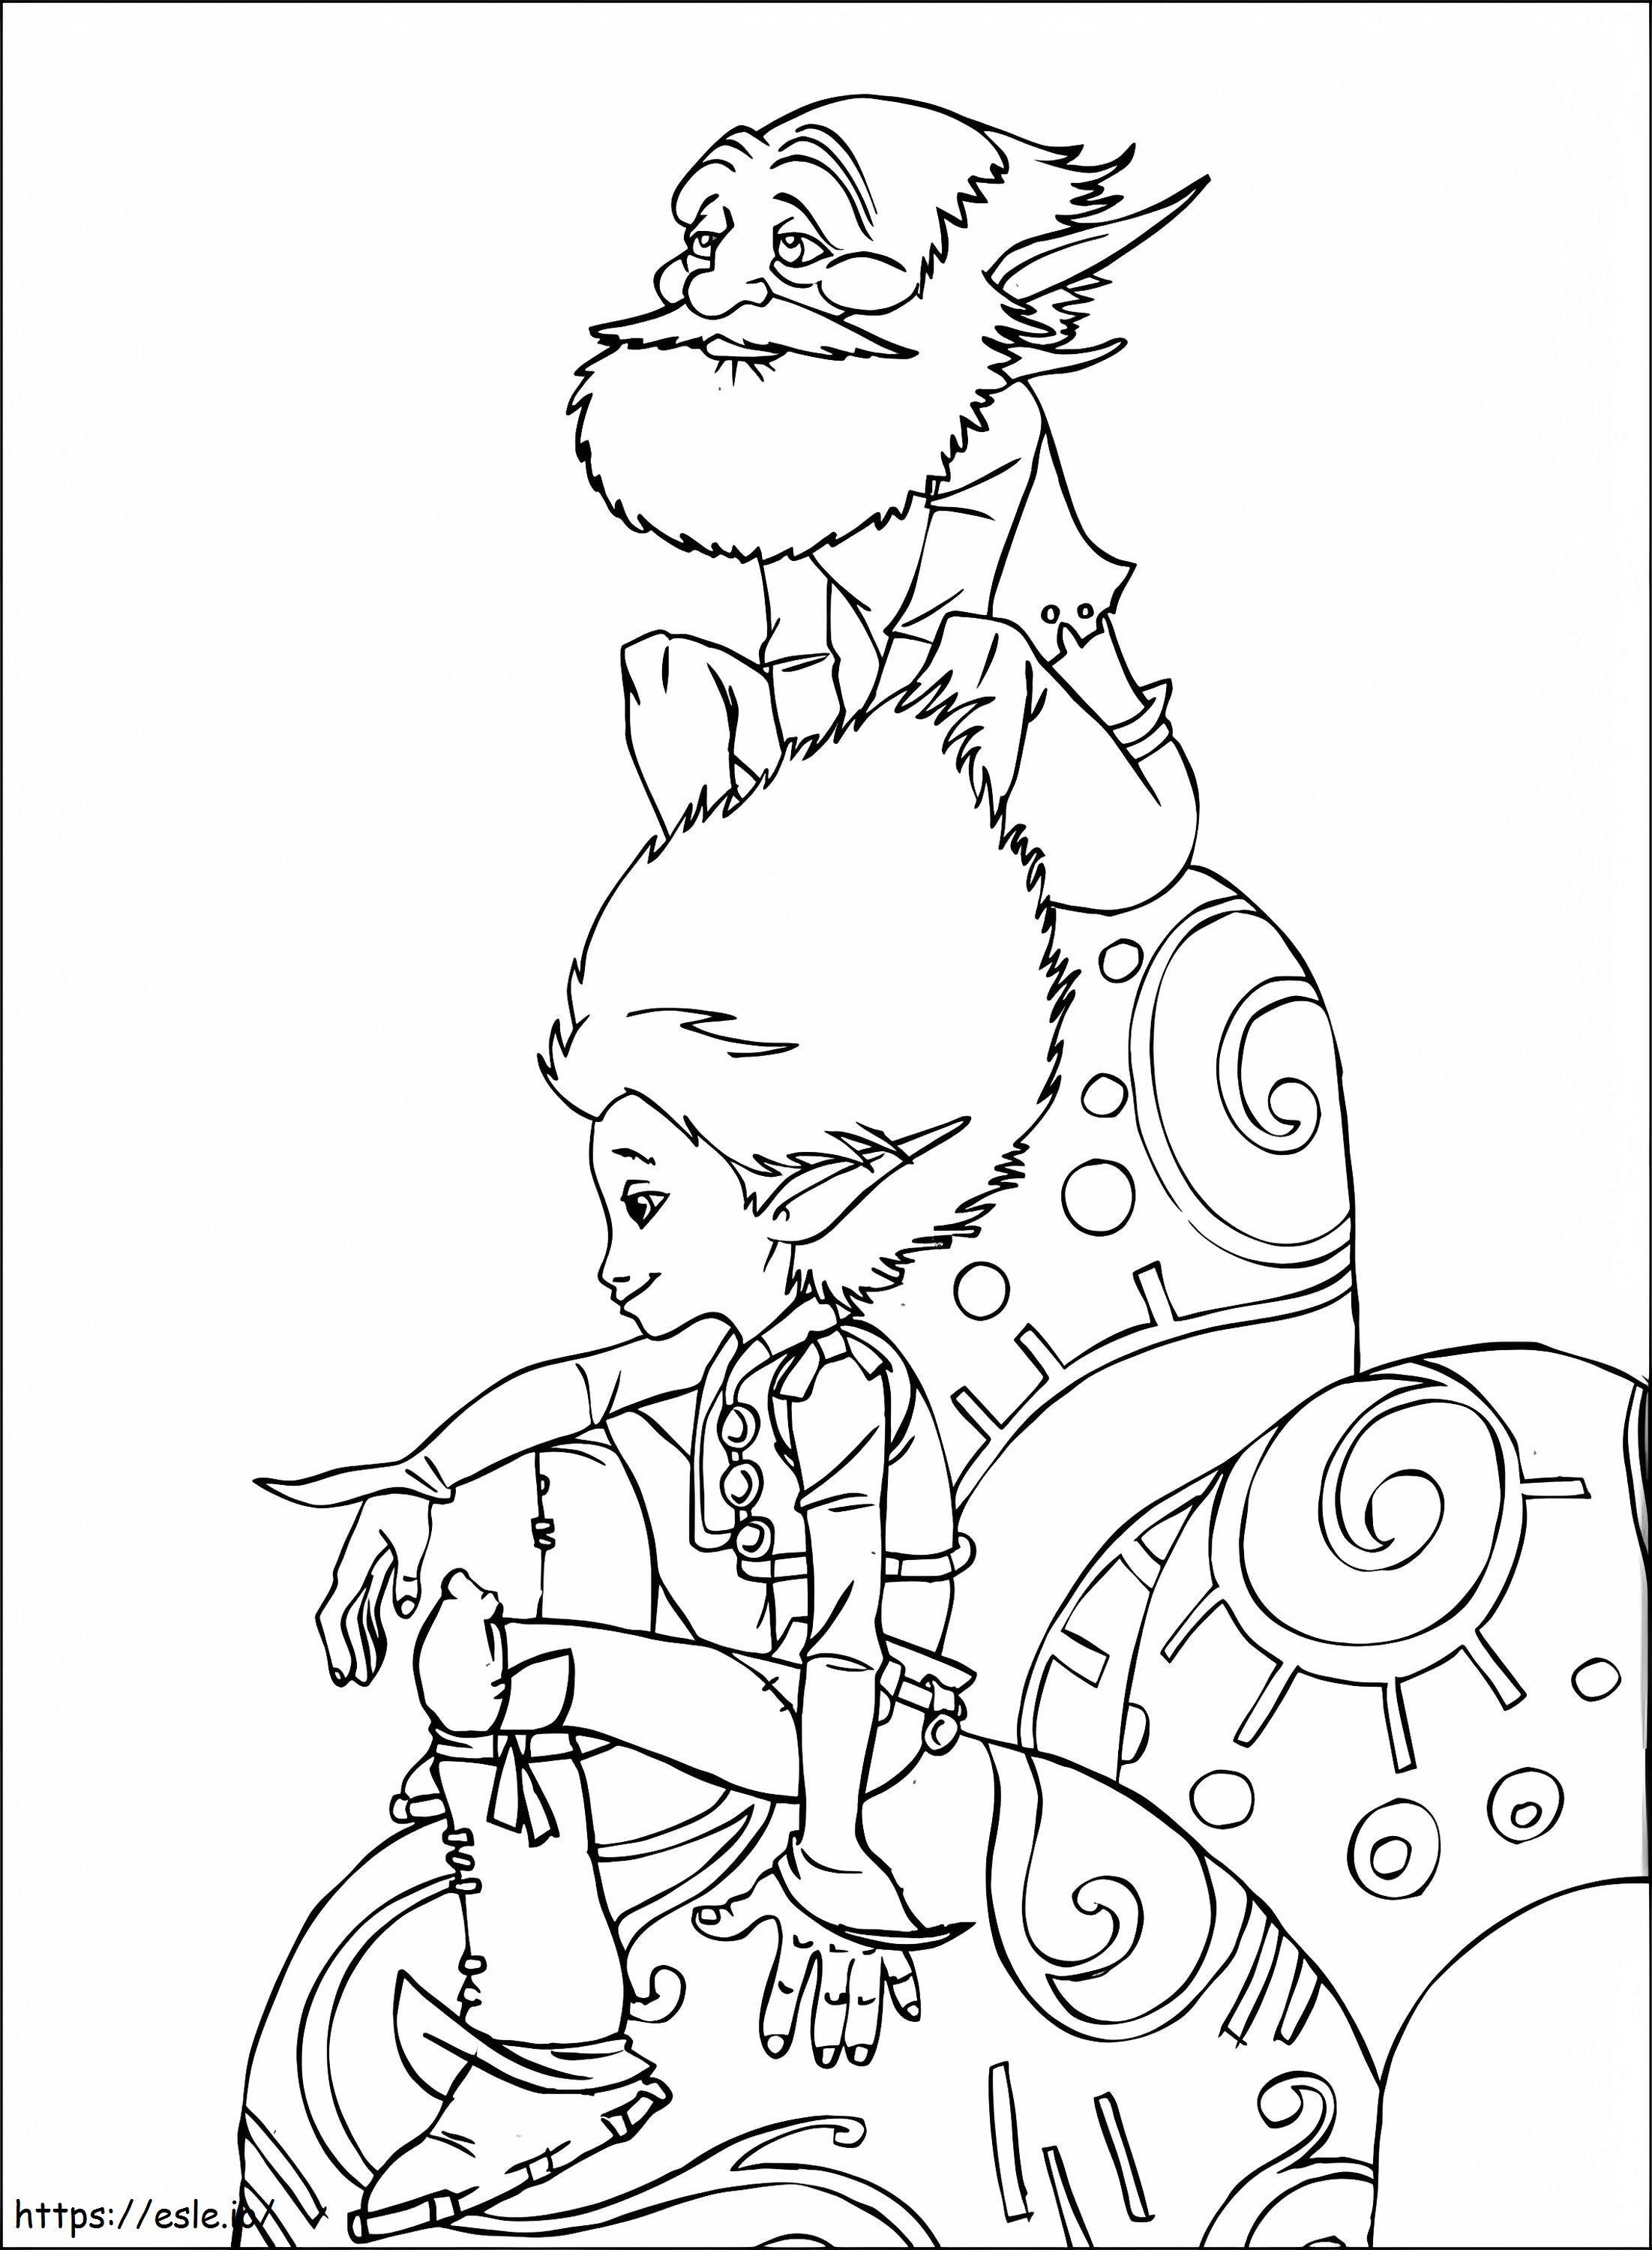 1533521968 Arthur And Archibald Sitting A4 coloring page